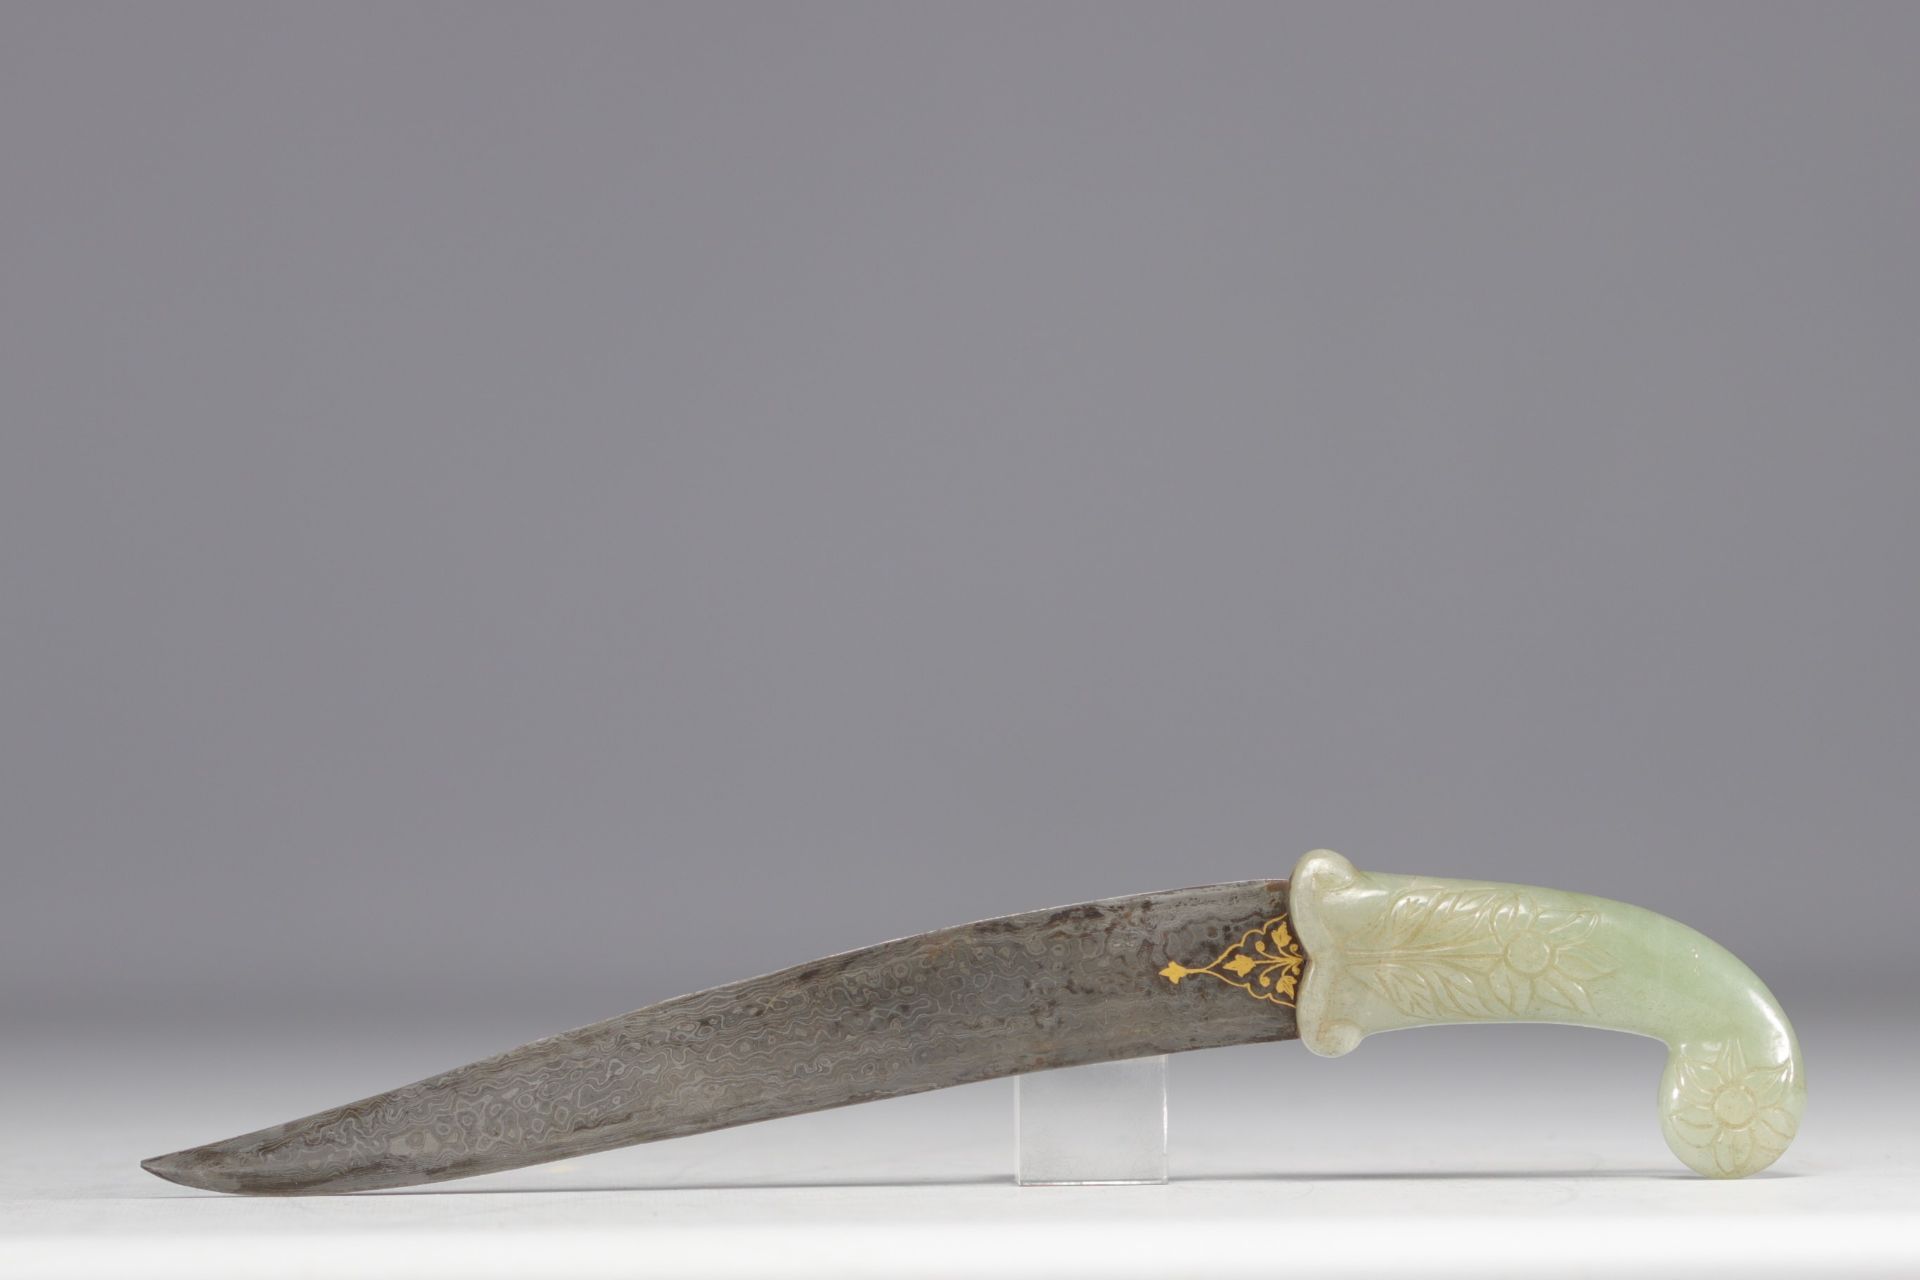 Mongolian-style dagger, jade handle, damascened blade with gold inlay. - Image 2 of 3